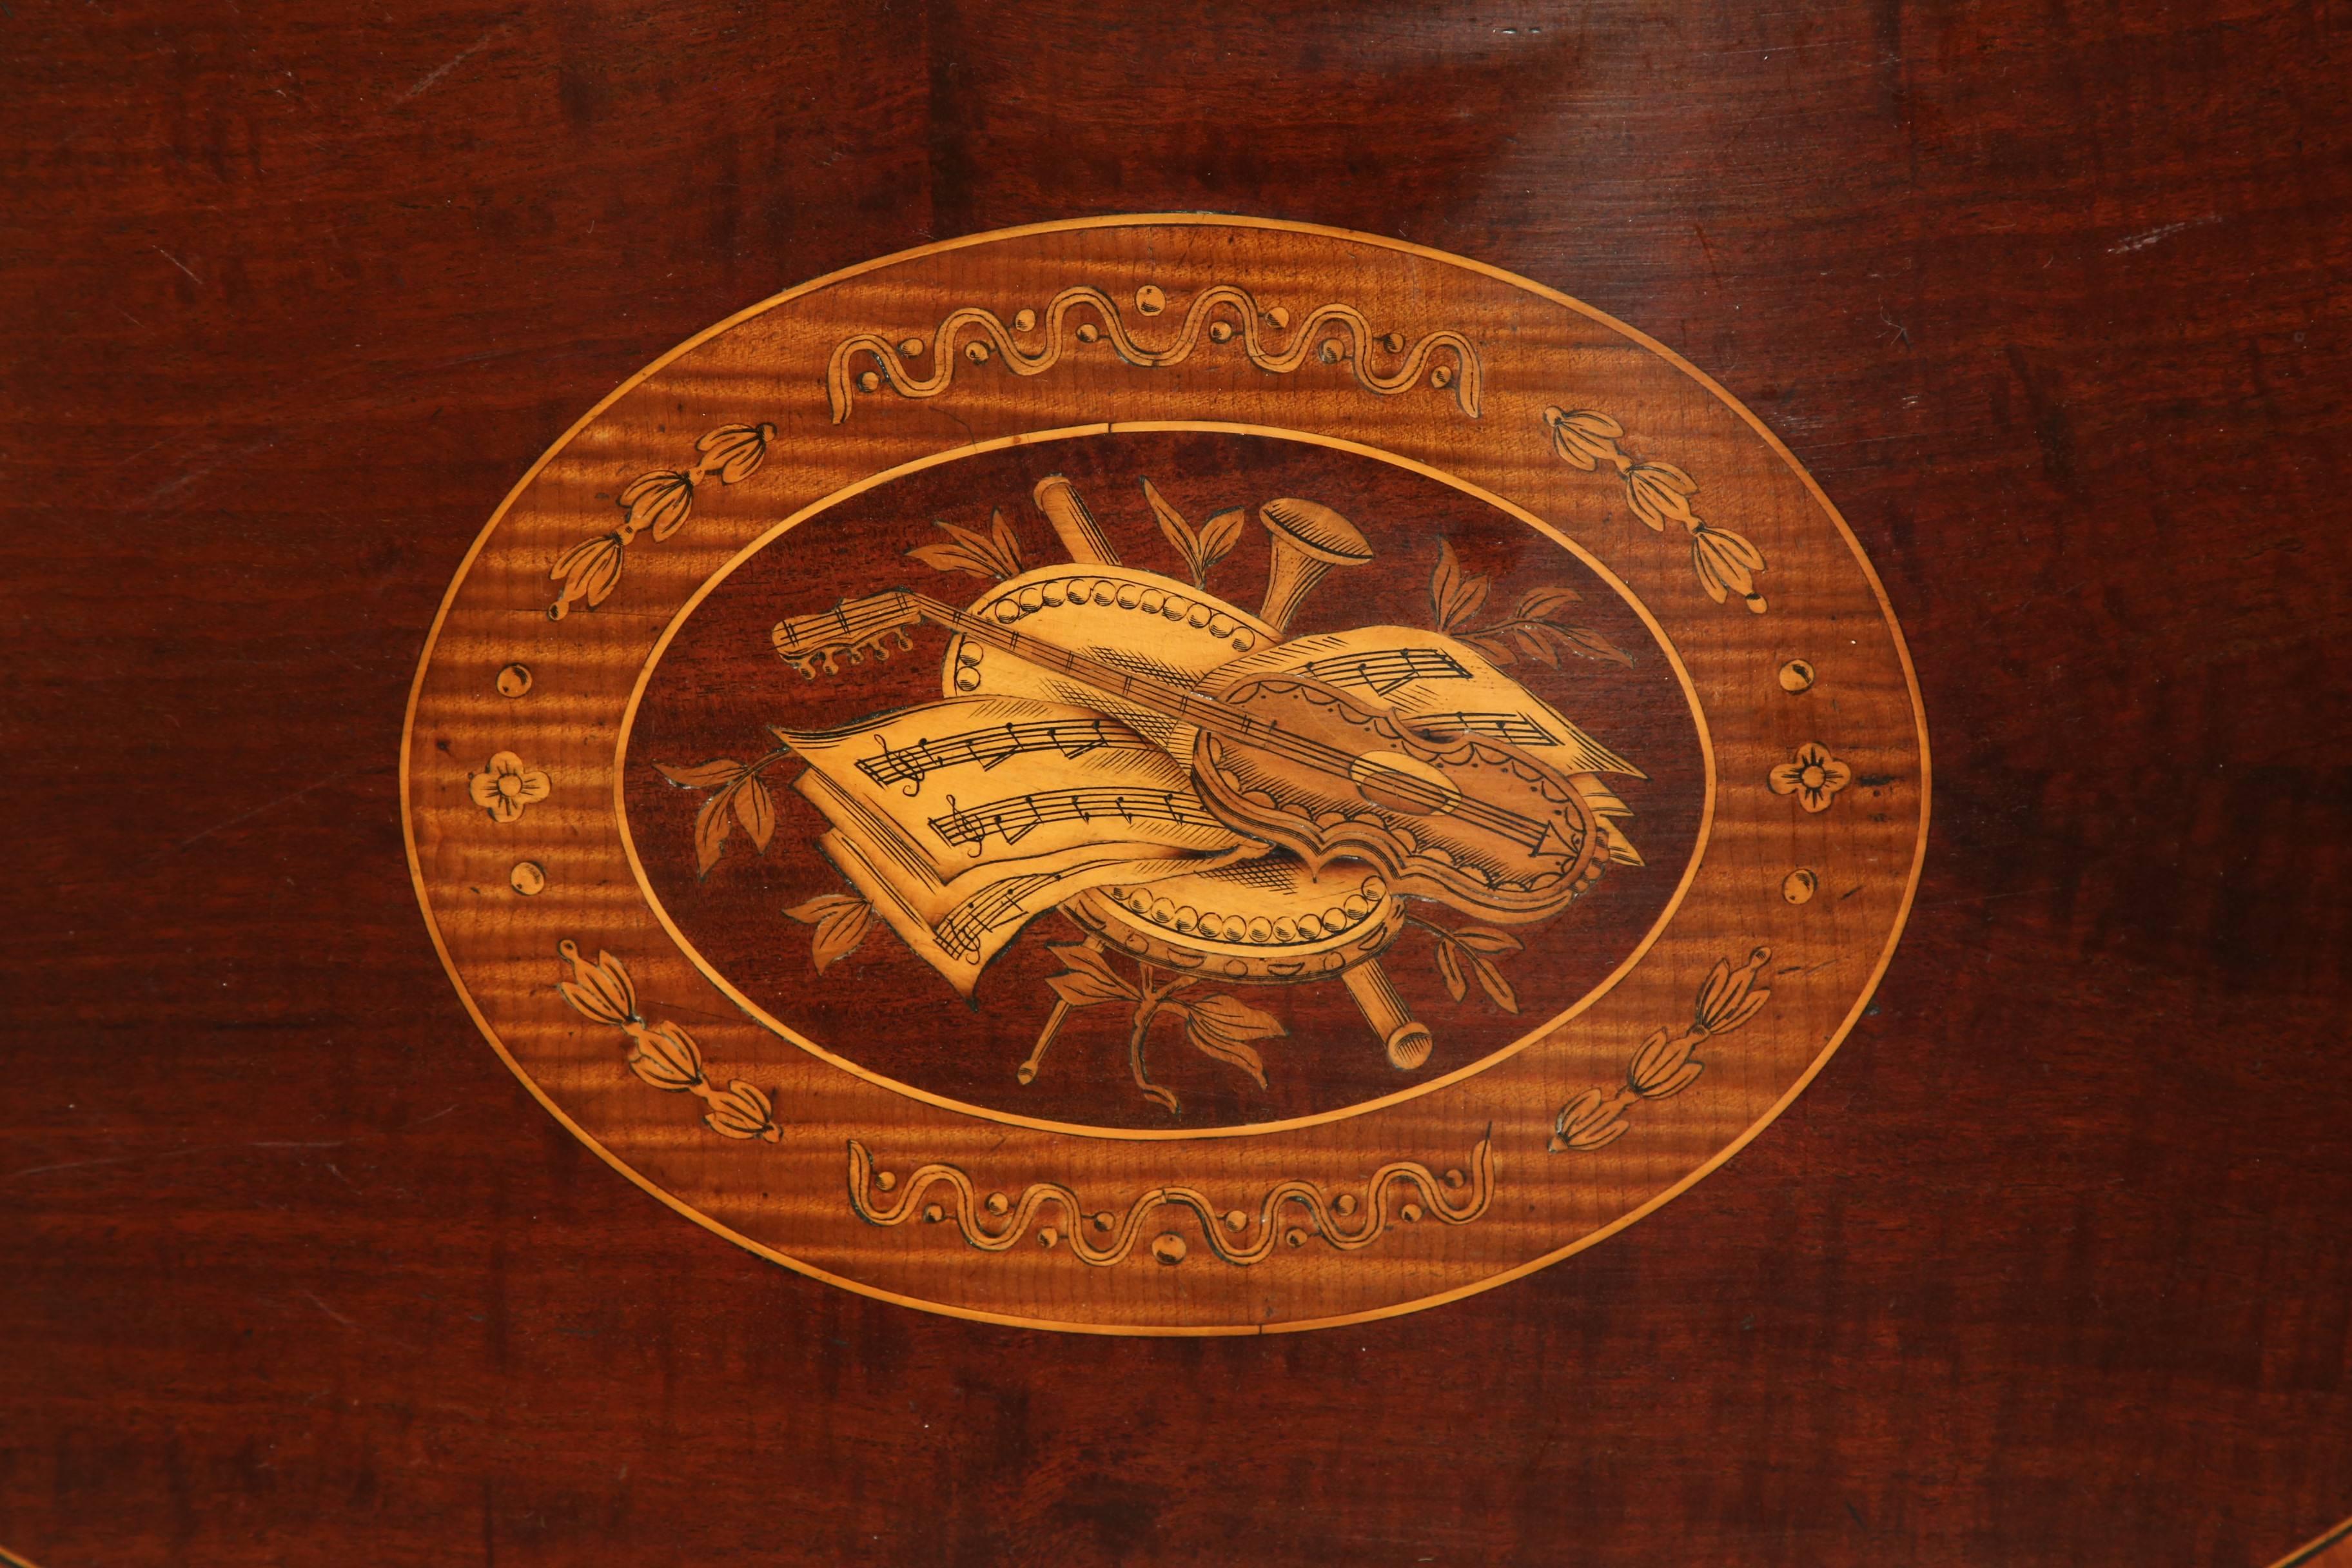 Embellish a coffee table or countertop with this beautiful, early 20th century mahogany tray from England, circa 1920. The serving tray features a central design with inlaid musical instruments and sheet note music. On the periphery is an additional